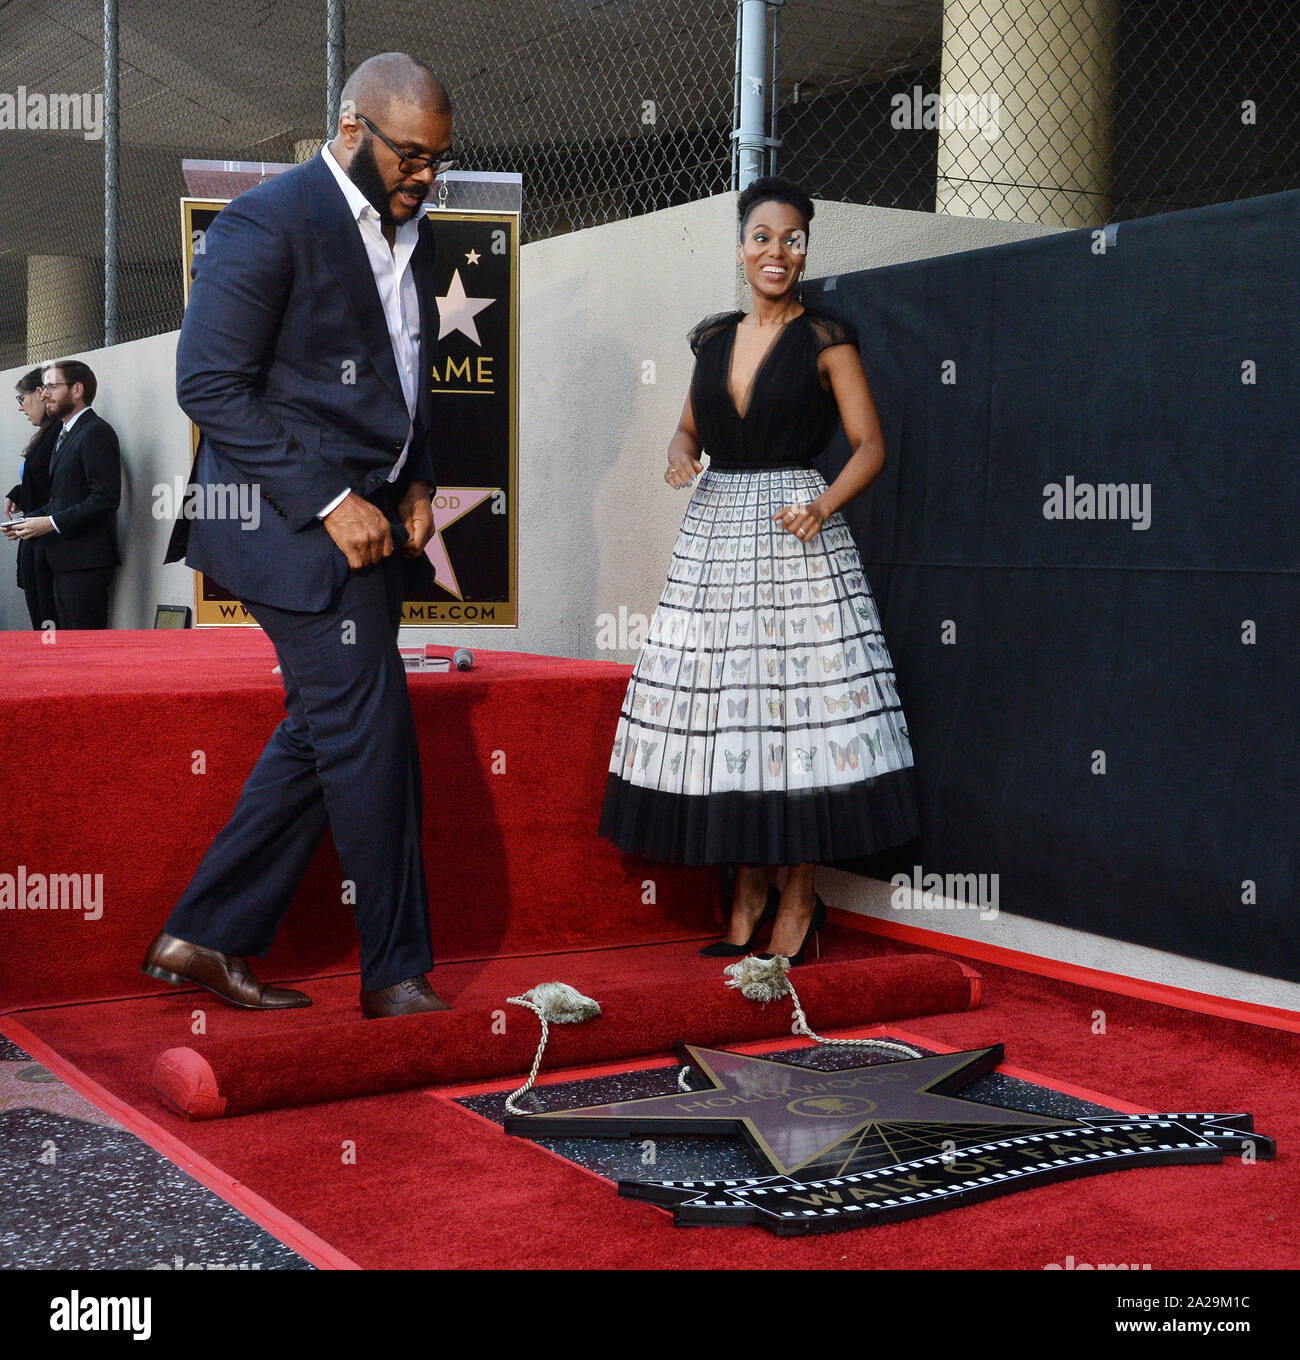 Los Angeles, United States. 01st Oct, 2019. Actor and filmmaker Tyler Perry is joined by actress Kerry Washington during an unveiling ceremony honoring him with the 2,675th star on the Hollywood Walk of Fame in Los Angeles on Tuesday, October 1, 2019. Photo by Jim Ruymen/UPI Credit: UPI/Alamy Live News Stock Photo